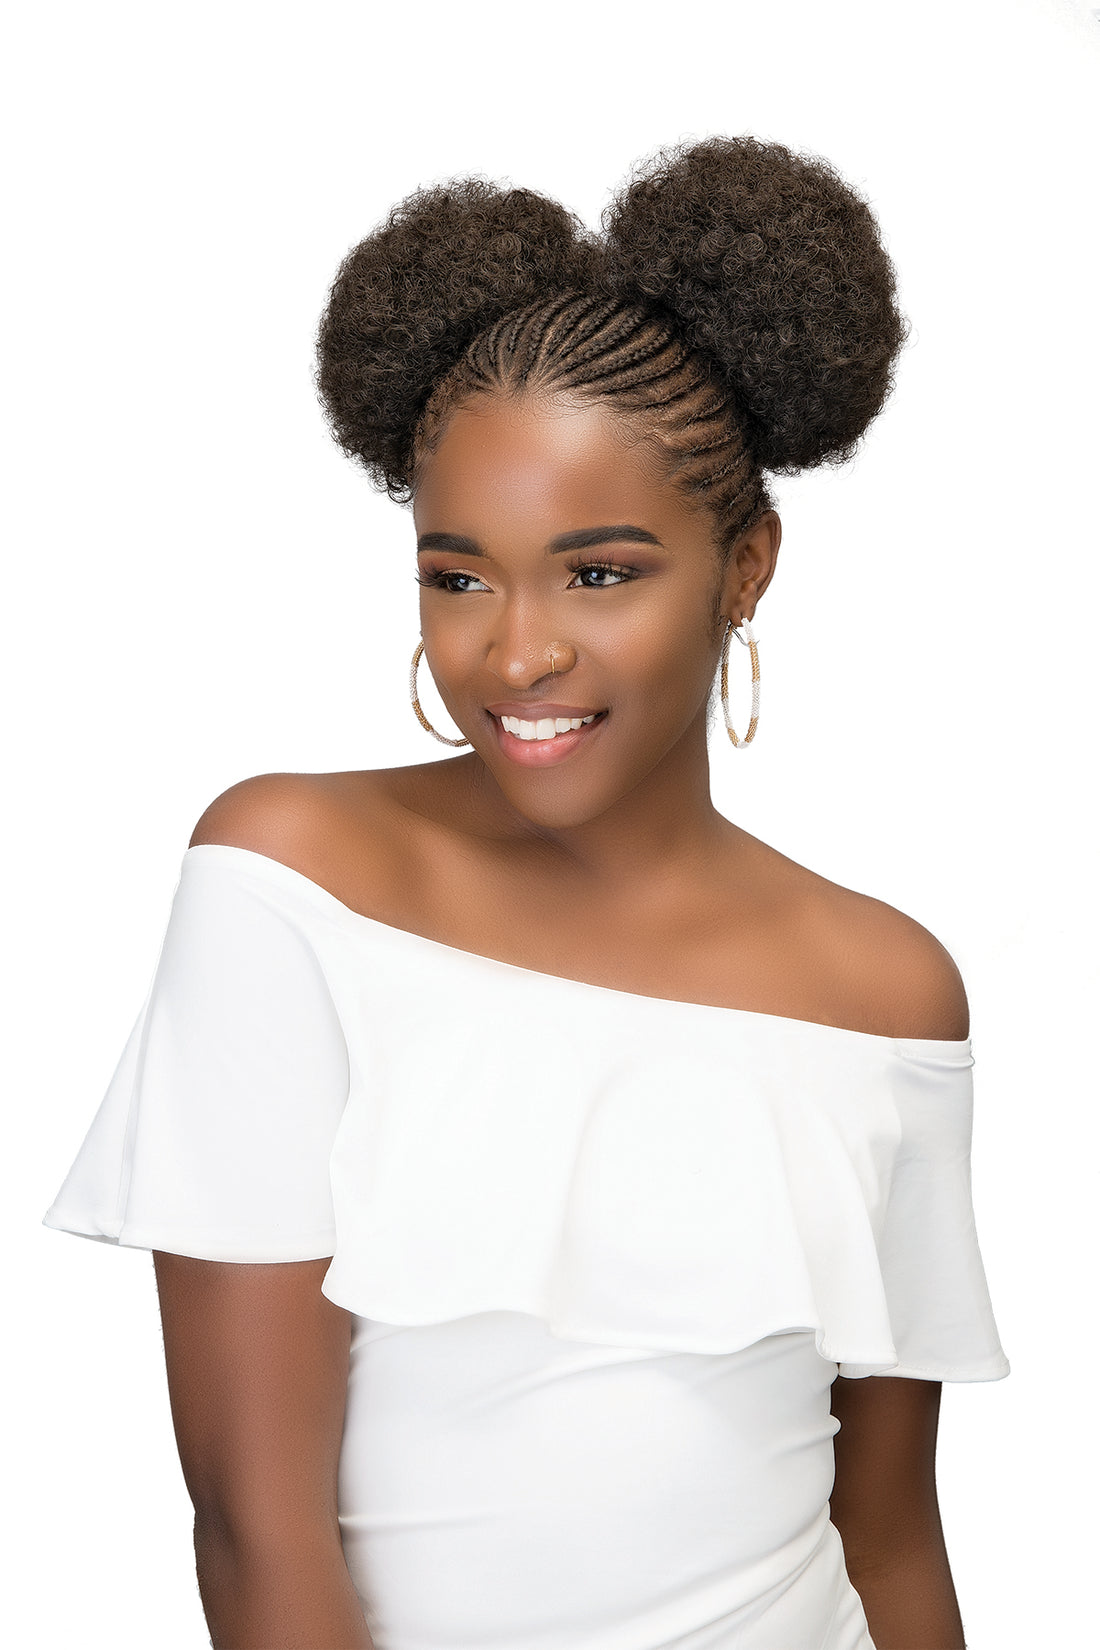 JANET COLLECTION - AFRO PUFF STRING (2PCS)